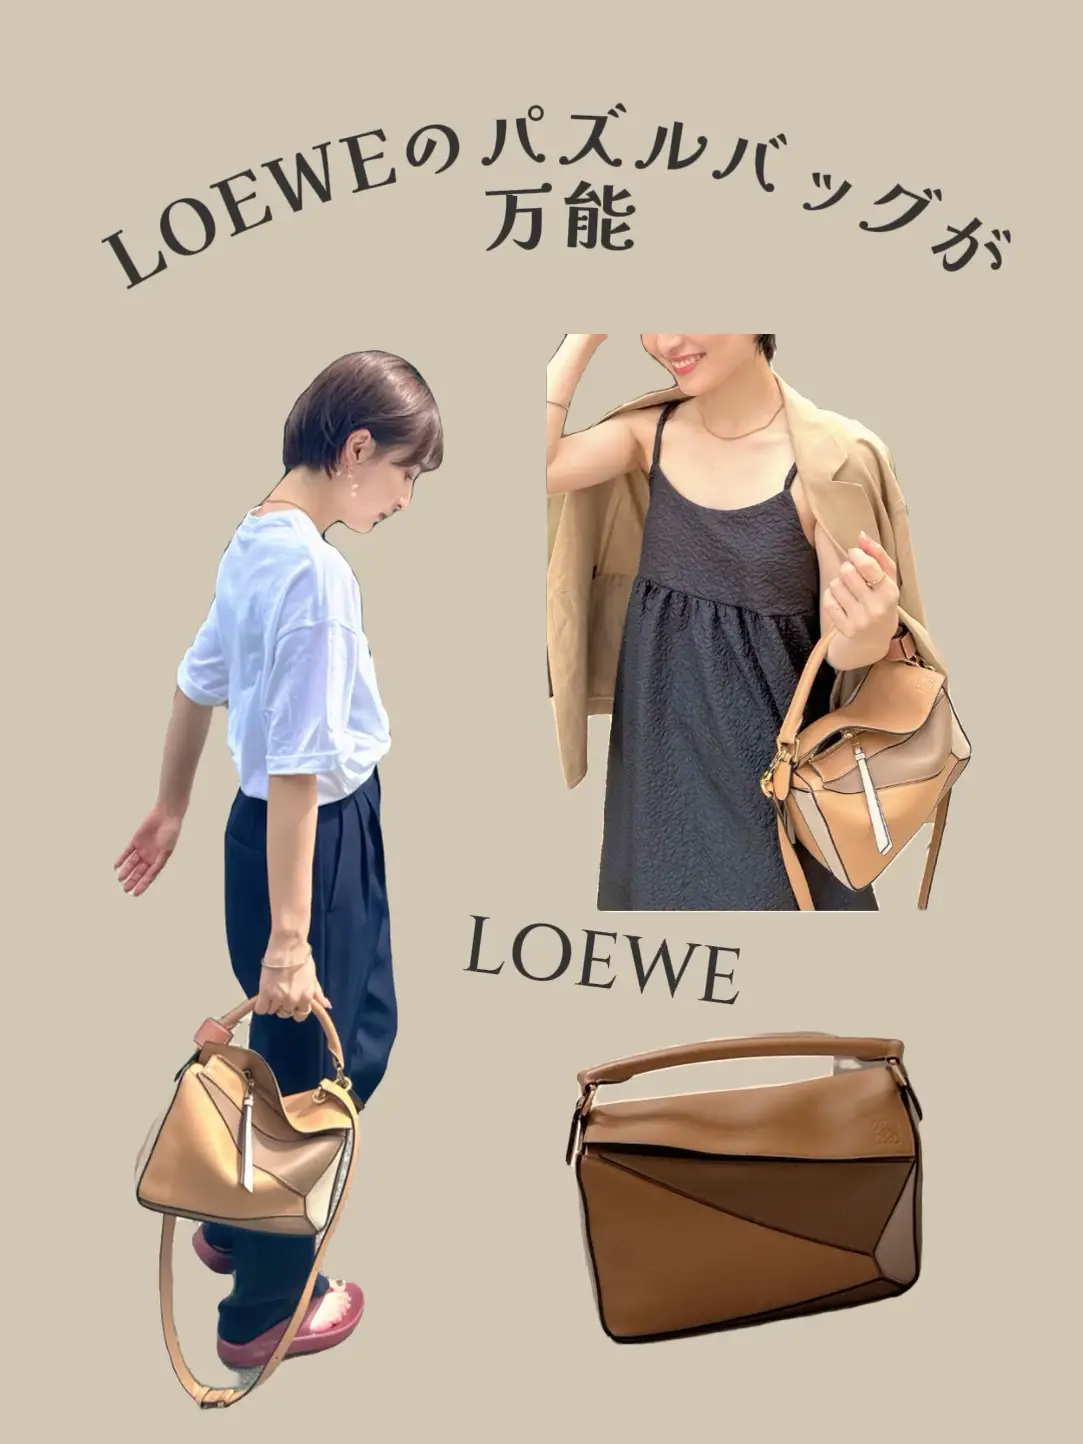 Loewe Puzzle Bag Size Comparison (and Dupes!)